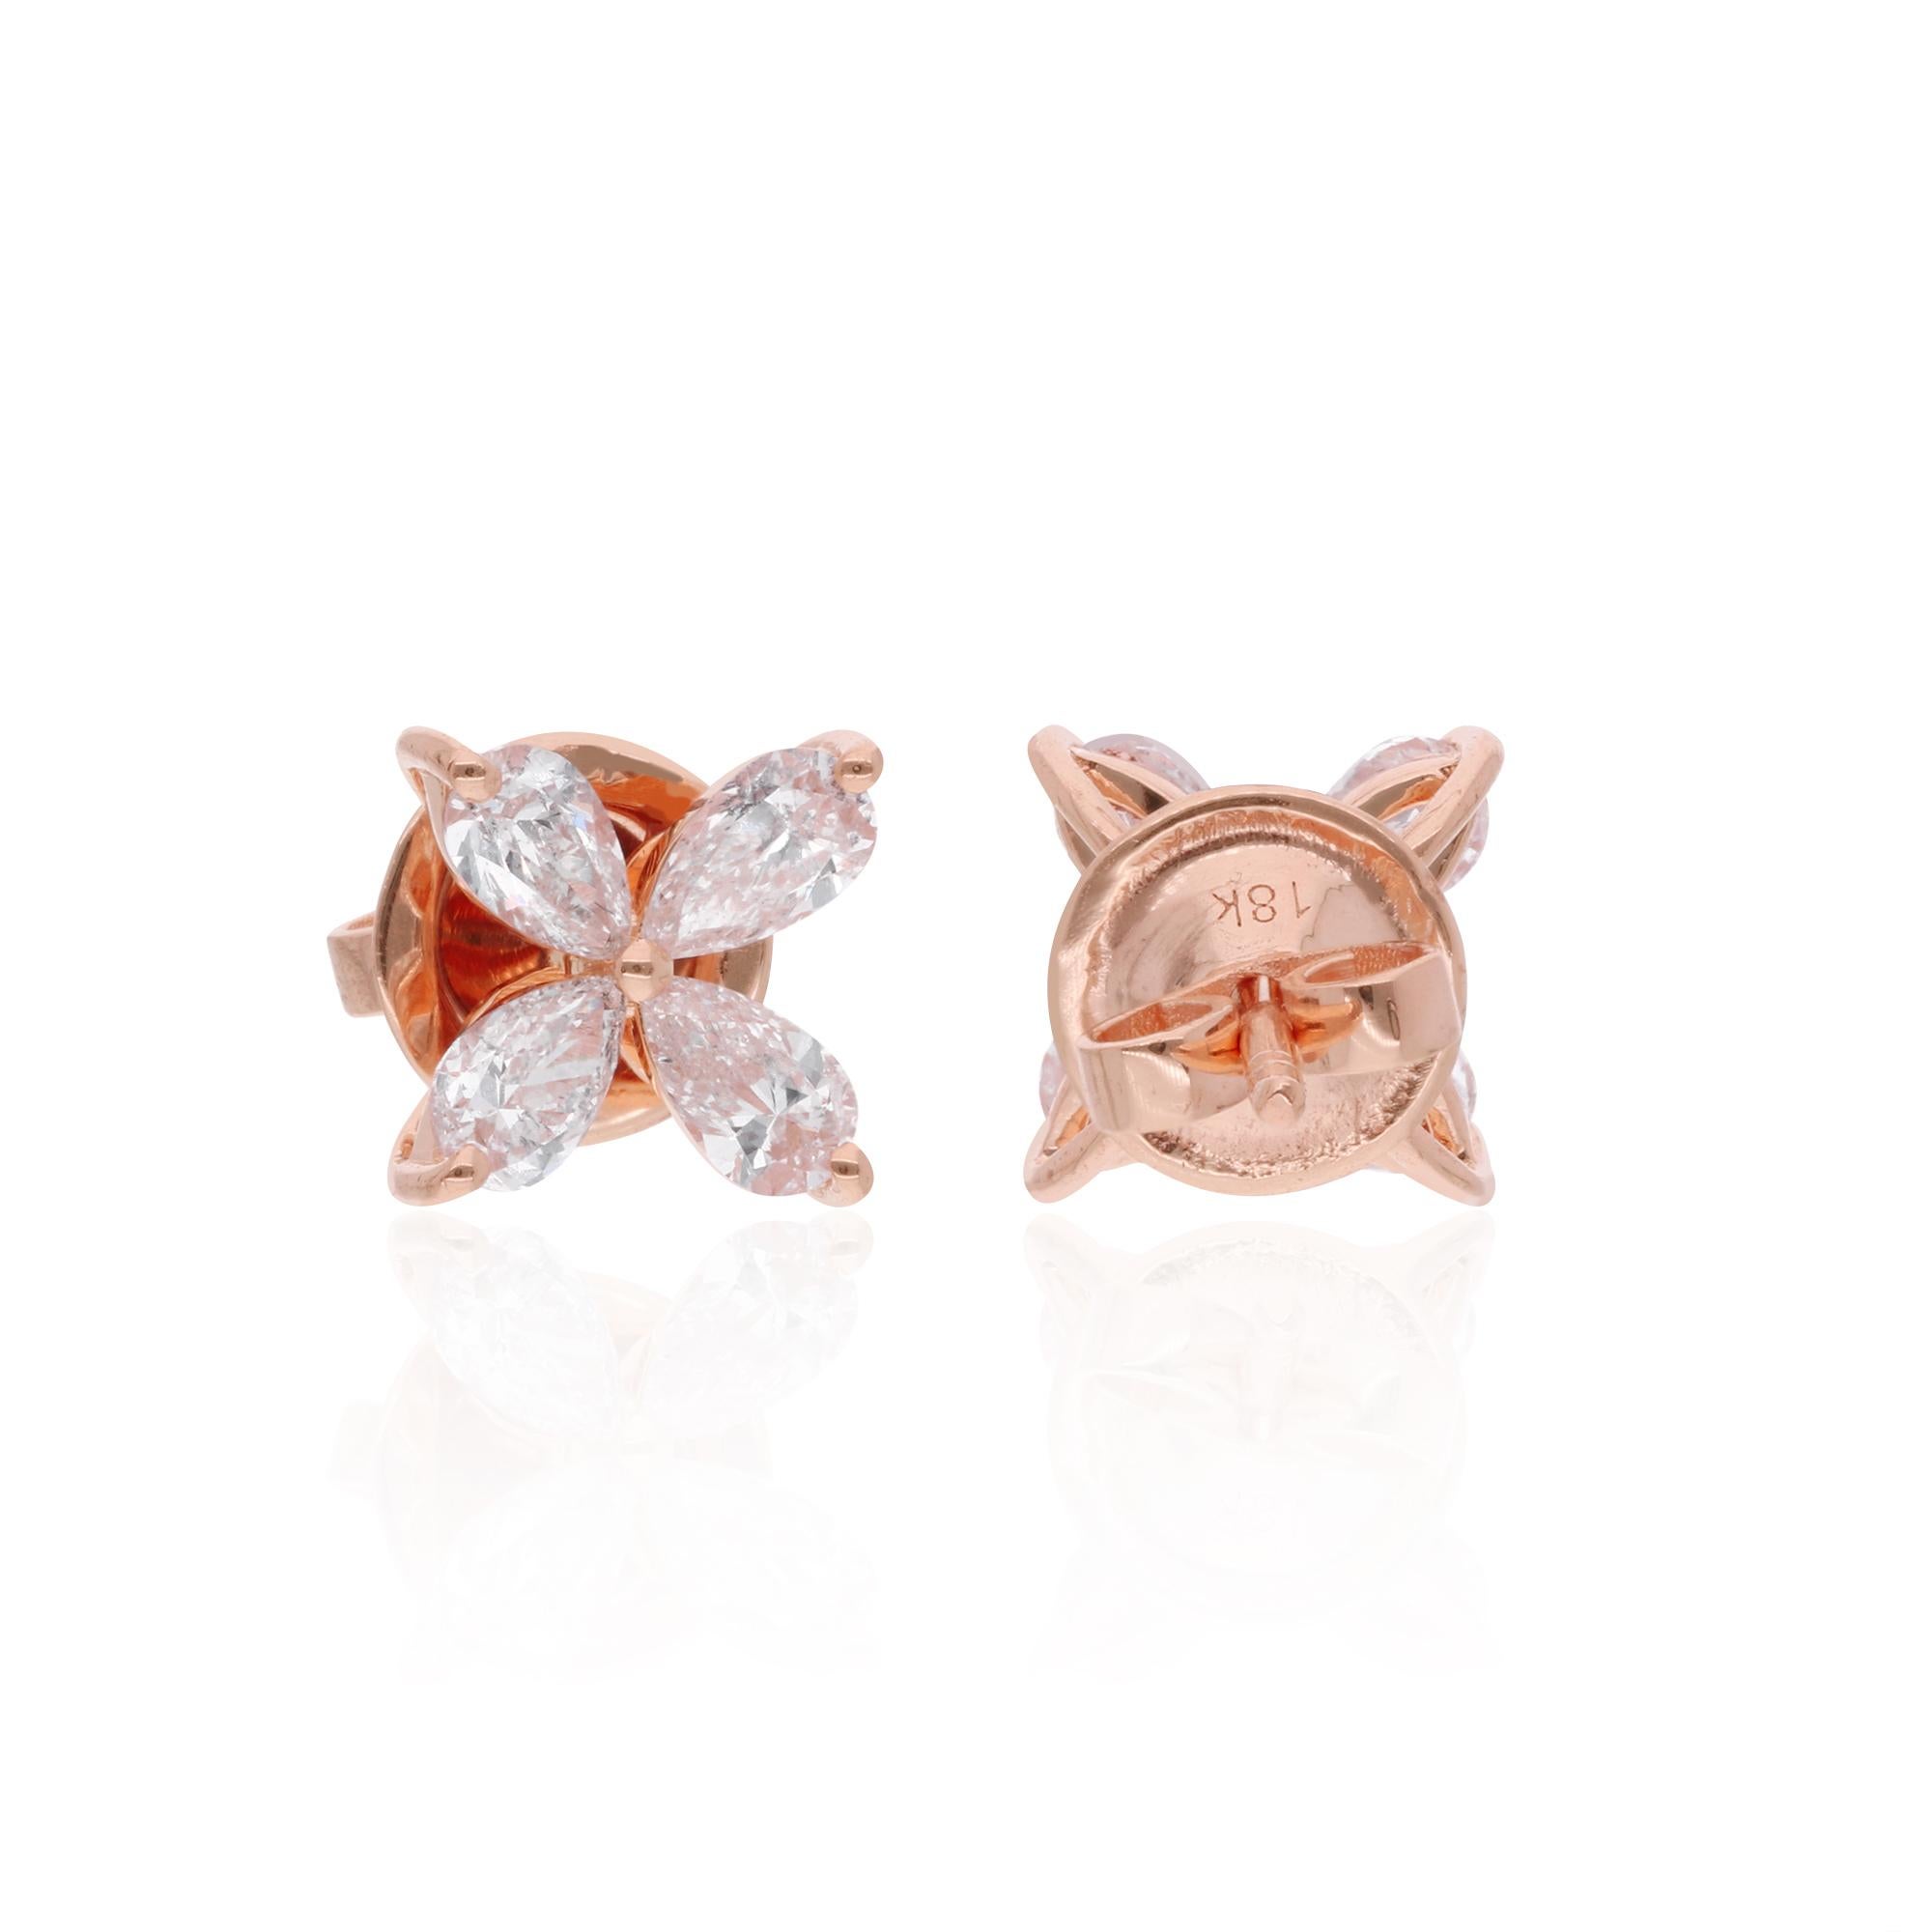 Item Code :- SEE-14352
Gross Wt. :- 2.42 gm
18k Rose Gold Wt. :- 2.18 gm
Natural Diamond Wt. :- 1.18 Ct.  ( AVERAGE DIAMOND CLARITY SI1-SI2 & COLOR H-I )
Earrings Size :- 8 mm approx.

✦ Sizing
.....................
We can adjust most items to fit